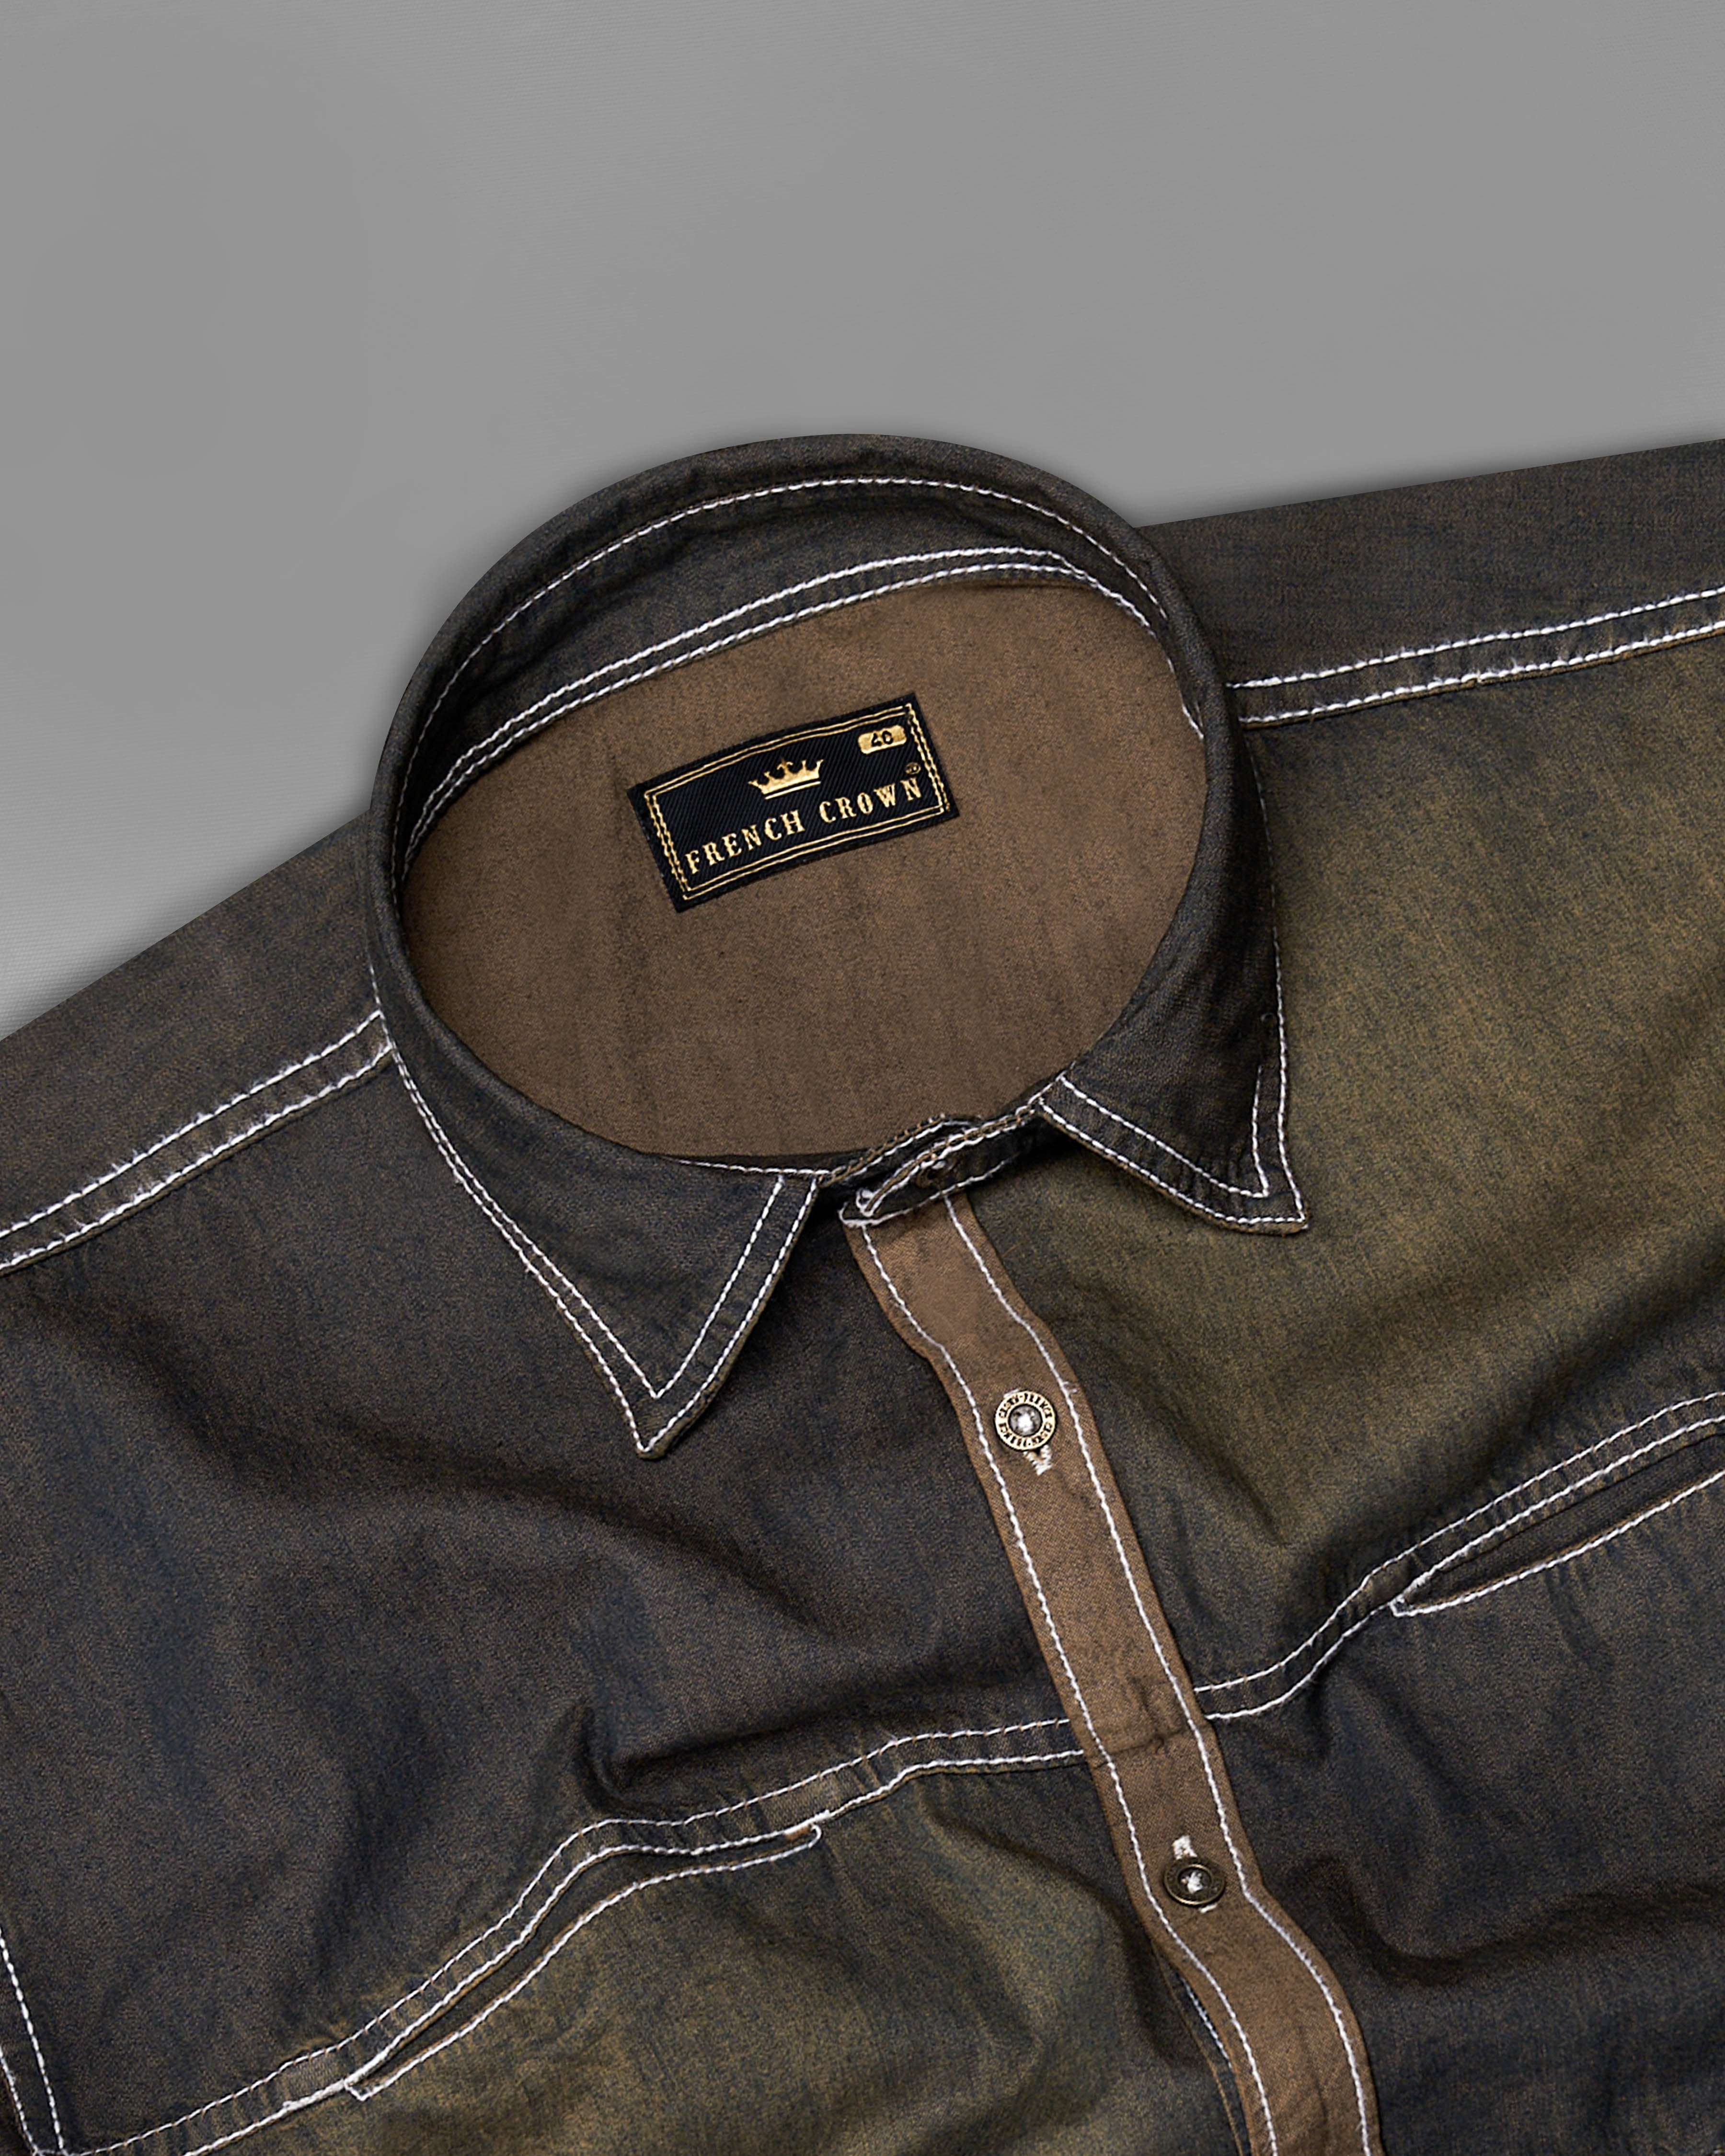 Dune Gray with Judge Brown Denim Shirt With Leather Patch Work 9200-MB-38,9200-MB-H-38,9200-MB-39,9200-MB-H-39,9200-MB-40,9200-MB-H-40,9200-MB-42,9200-MB-H-42,9200-MB-44,9200-MB-H-44,9200-MB-46,9200-MB-H-46,9200-MB-48,9200-MB-H-48,9200-MB-50,9200-MB-H-50,9200-MB-52,9200-MB-H-52